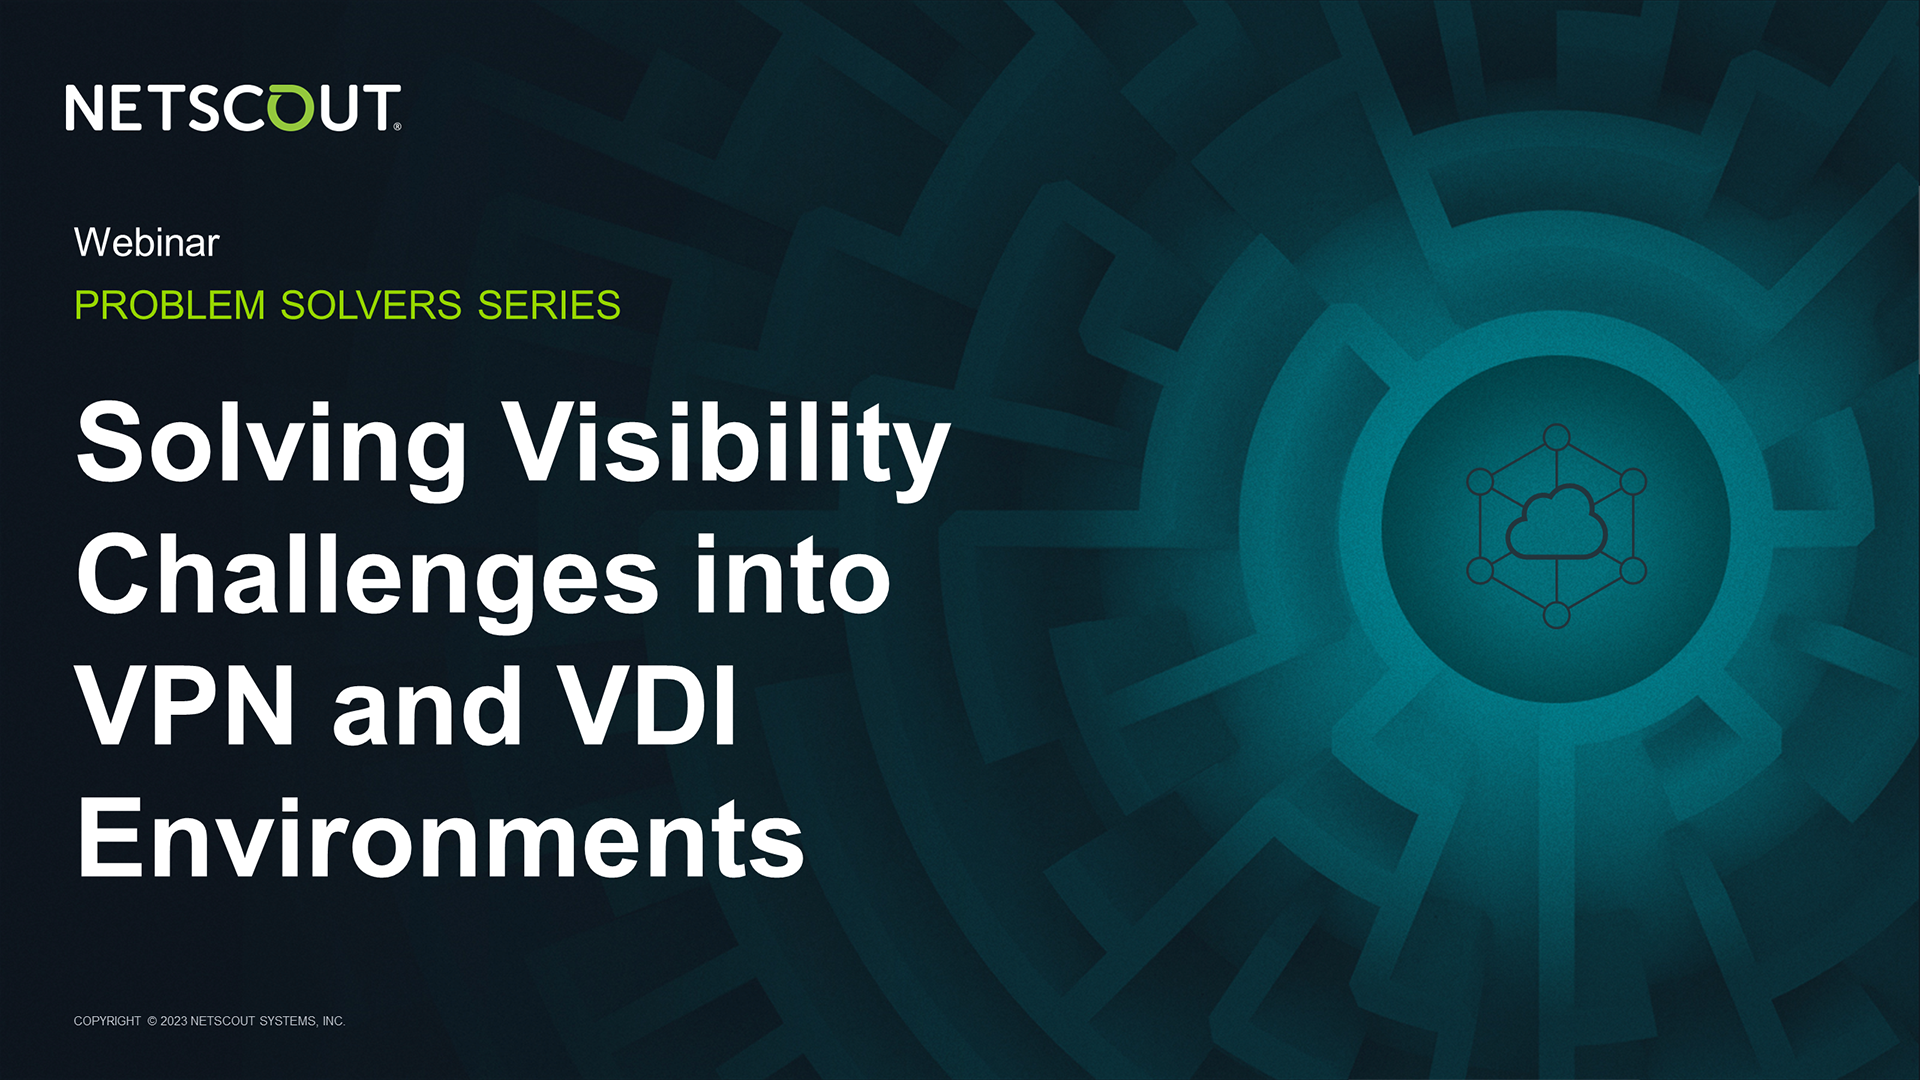 Solving Visibility Challenges into VPN and VDI Environments